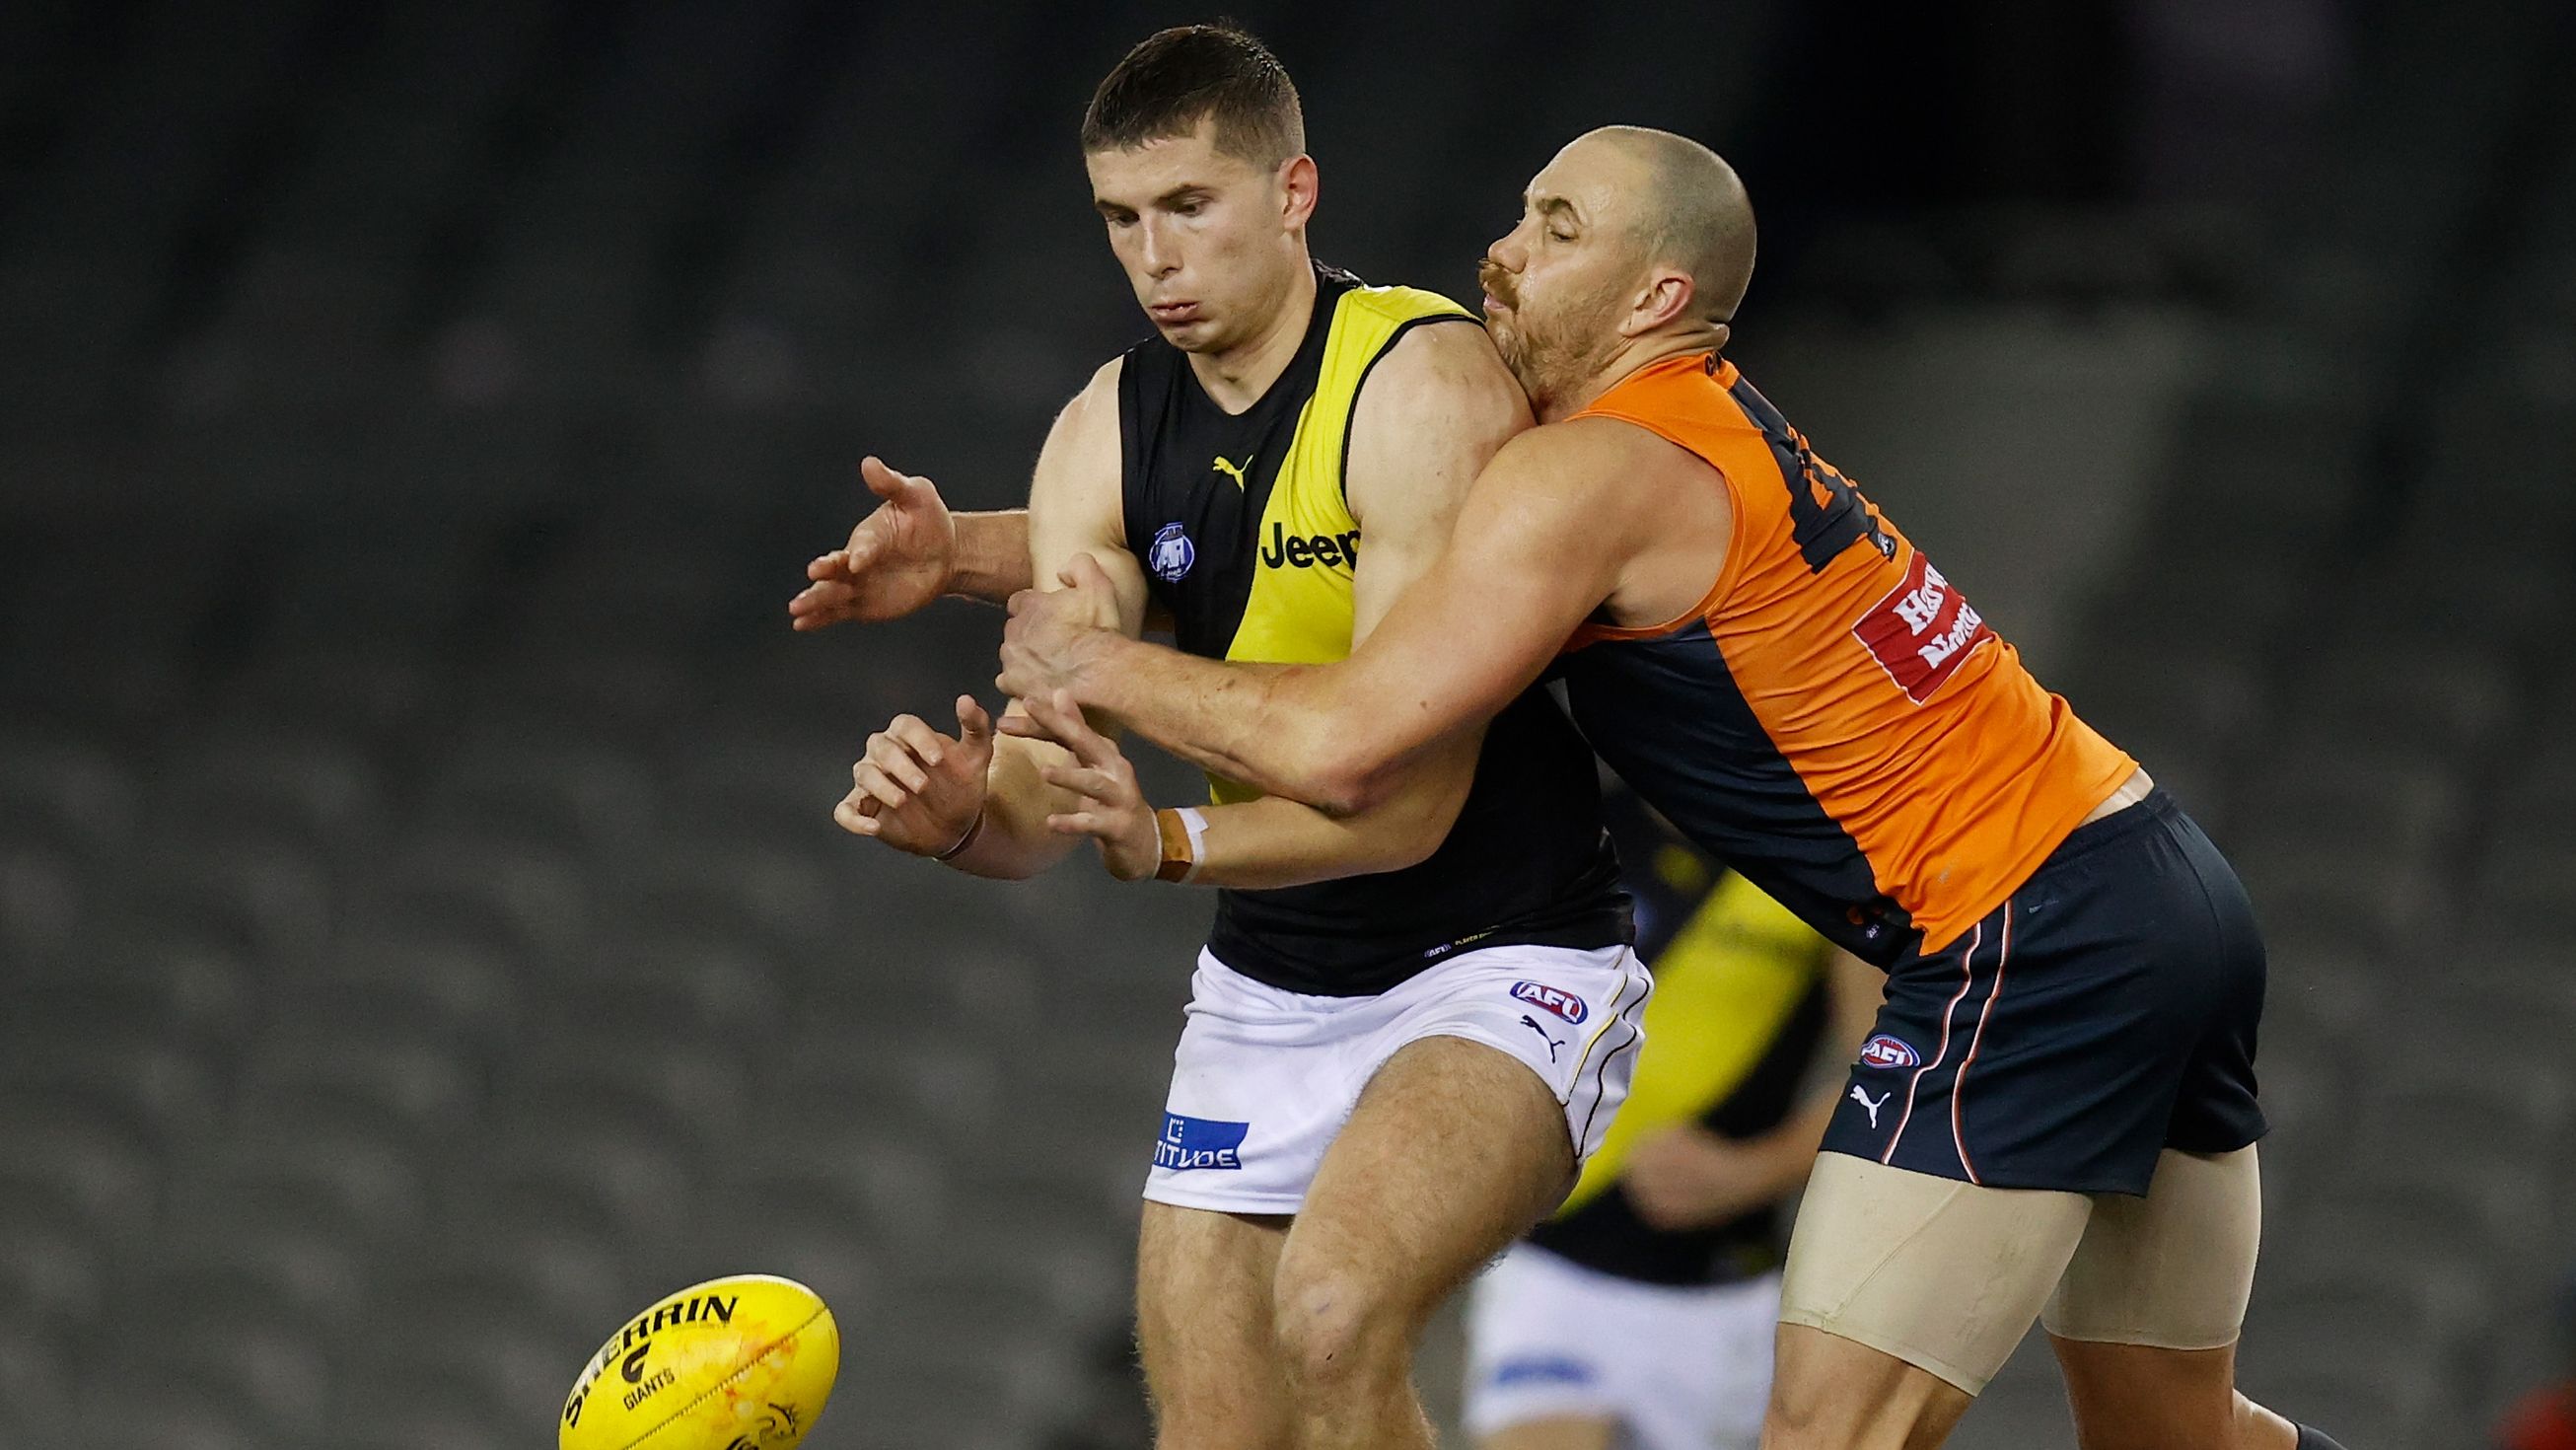 Caro rips Tigers youngster amid contract query